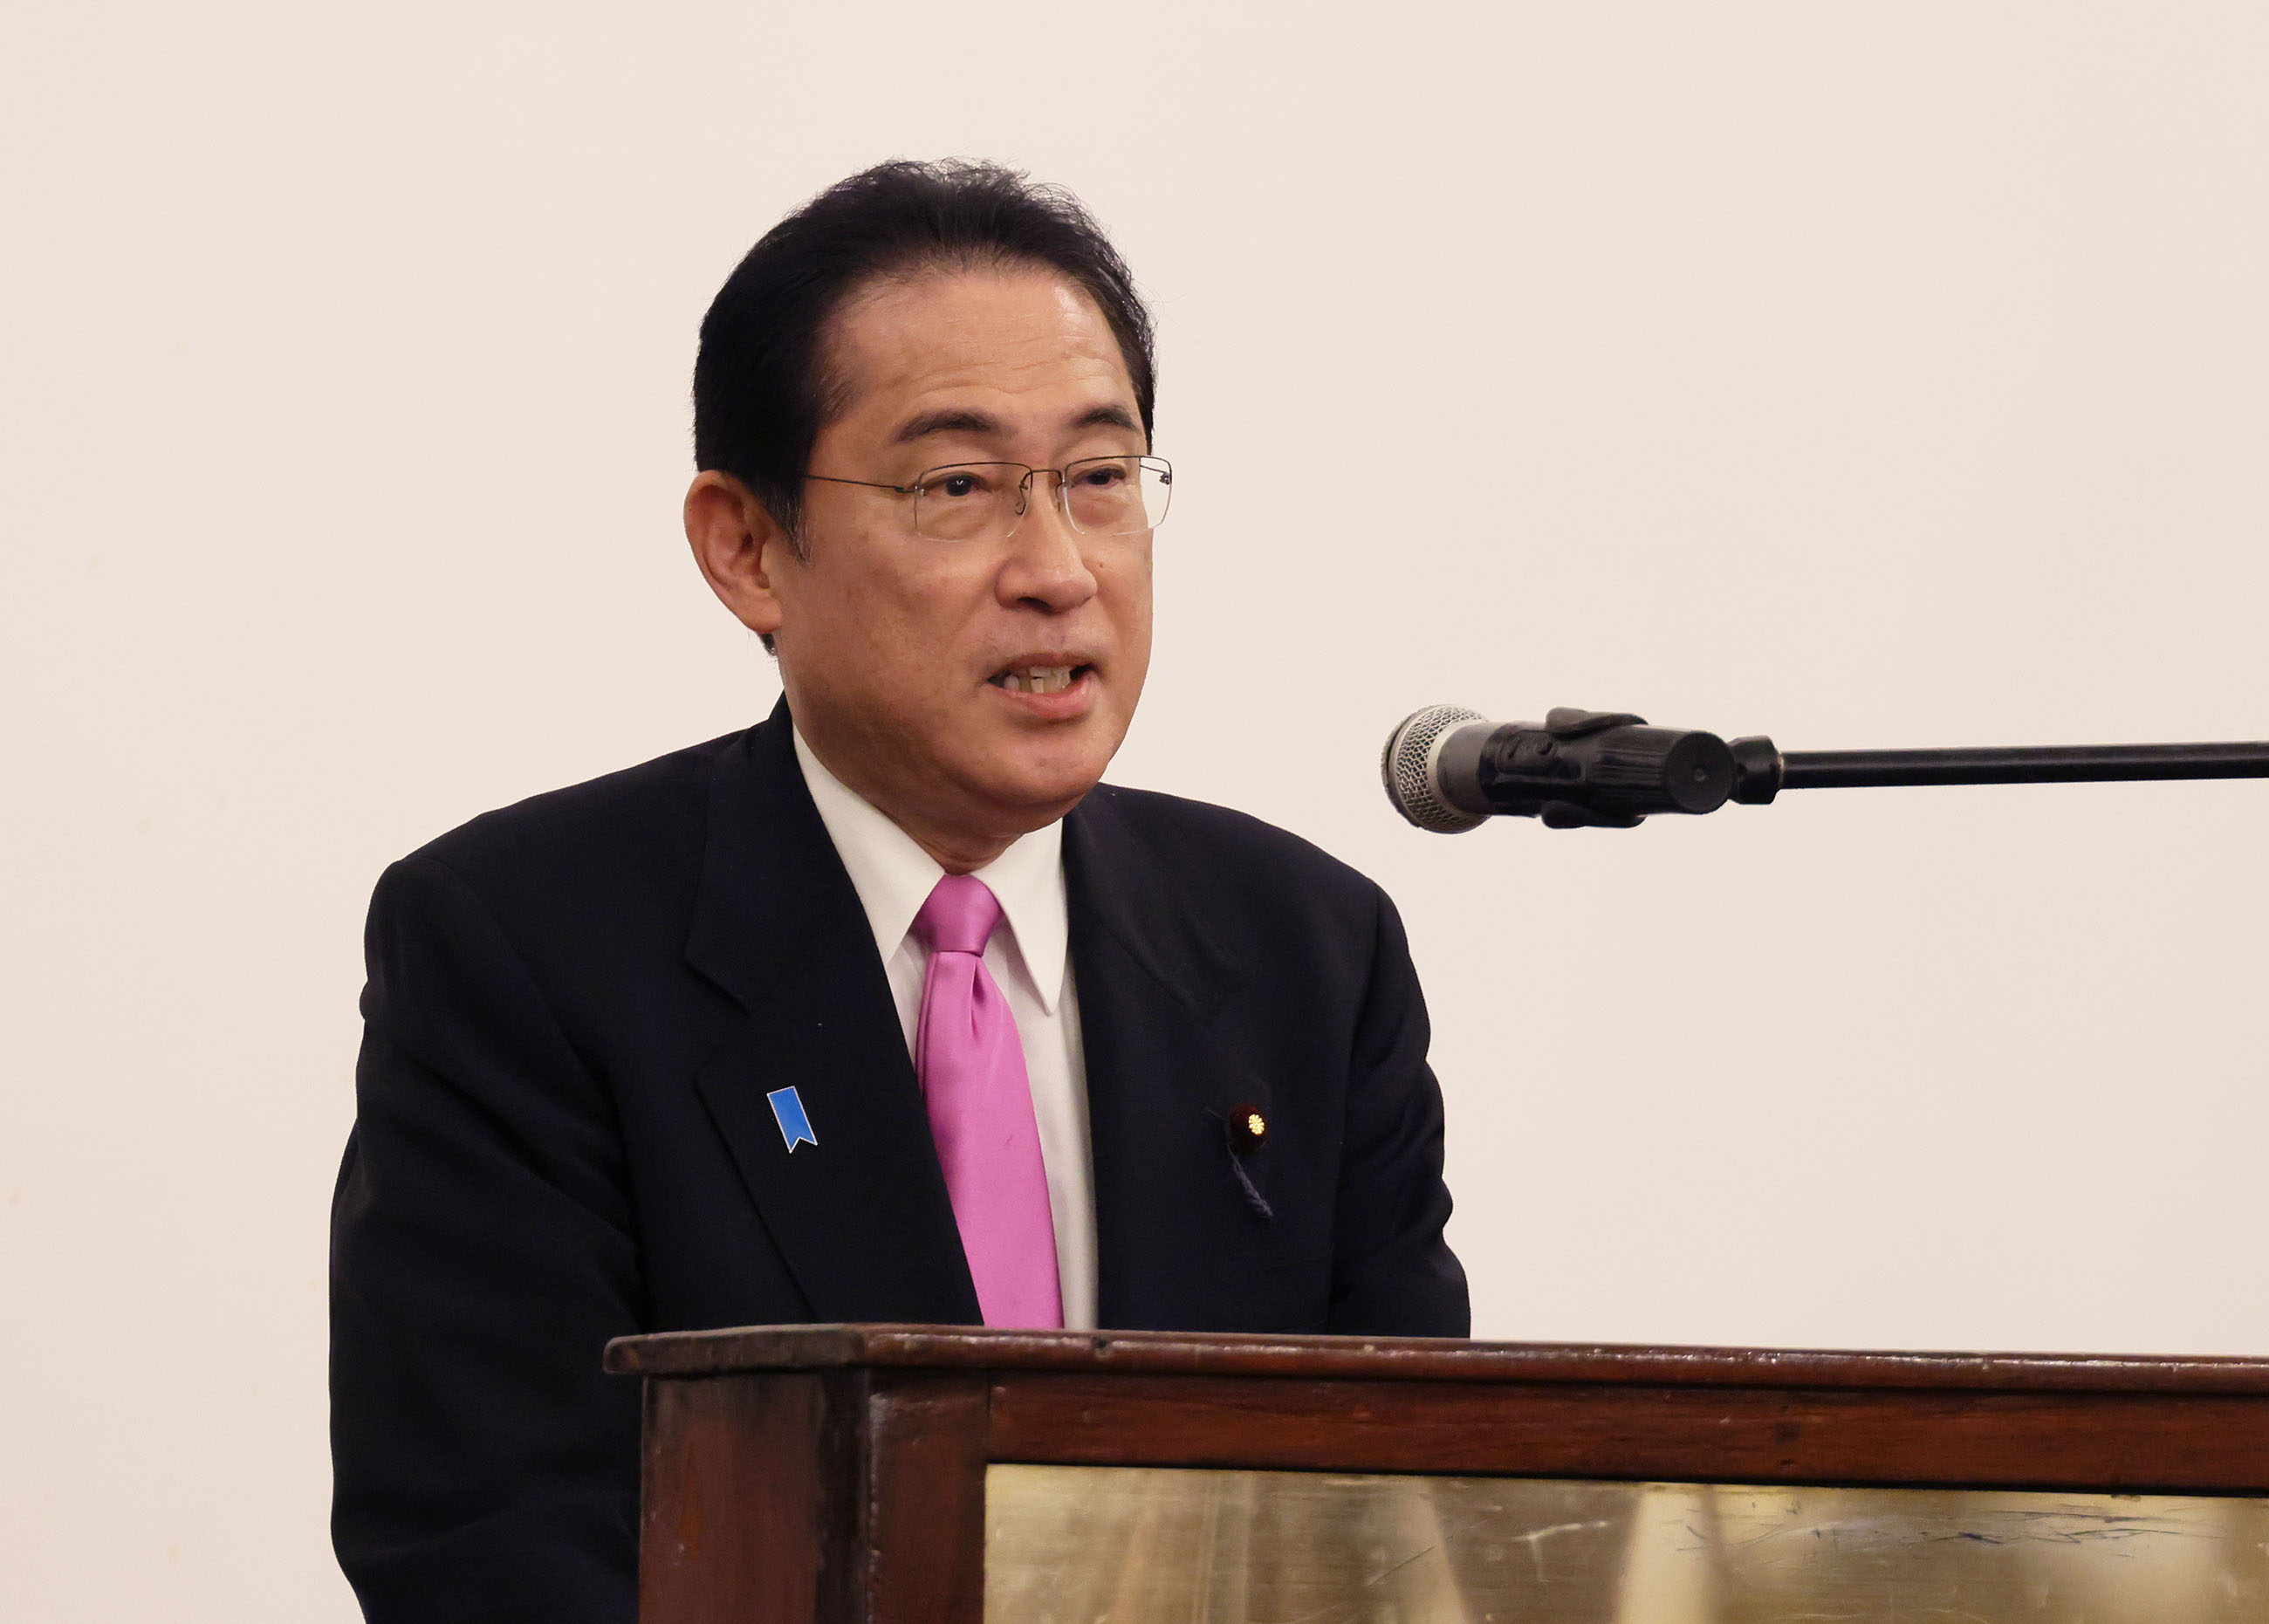 Prime Minister Kishida delivering an address at the Japan-Mozambique Business Exchange Meeting (2)